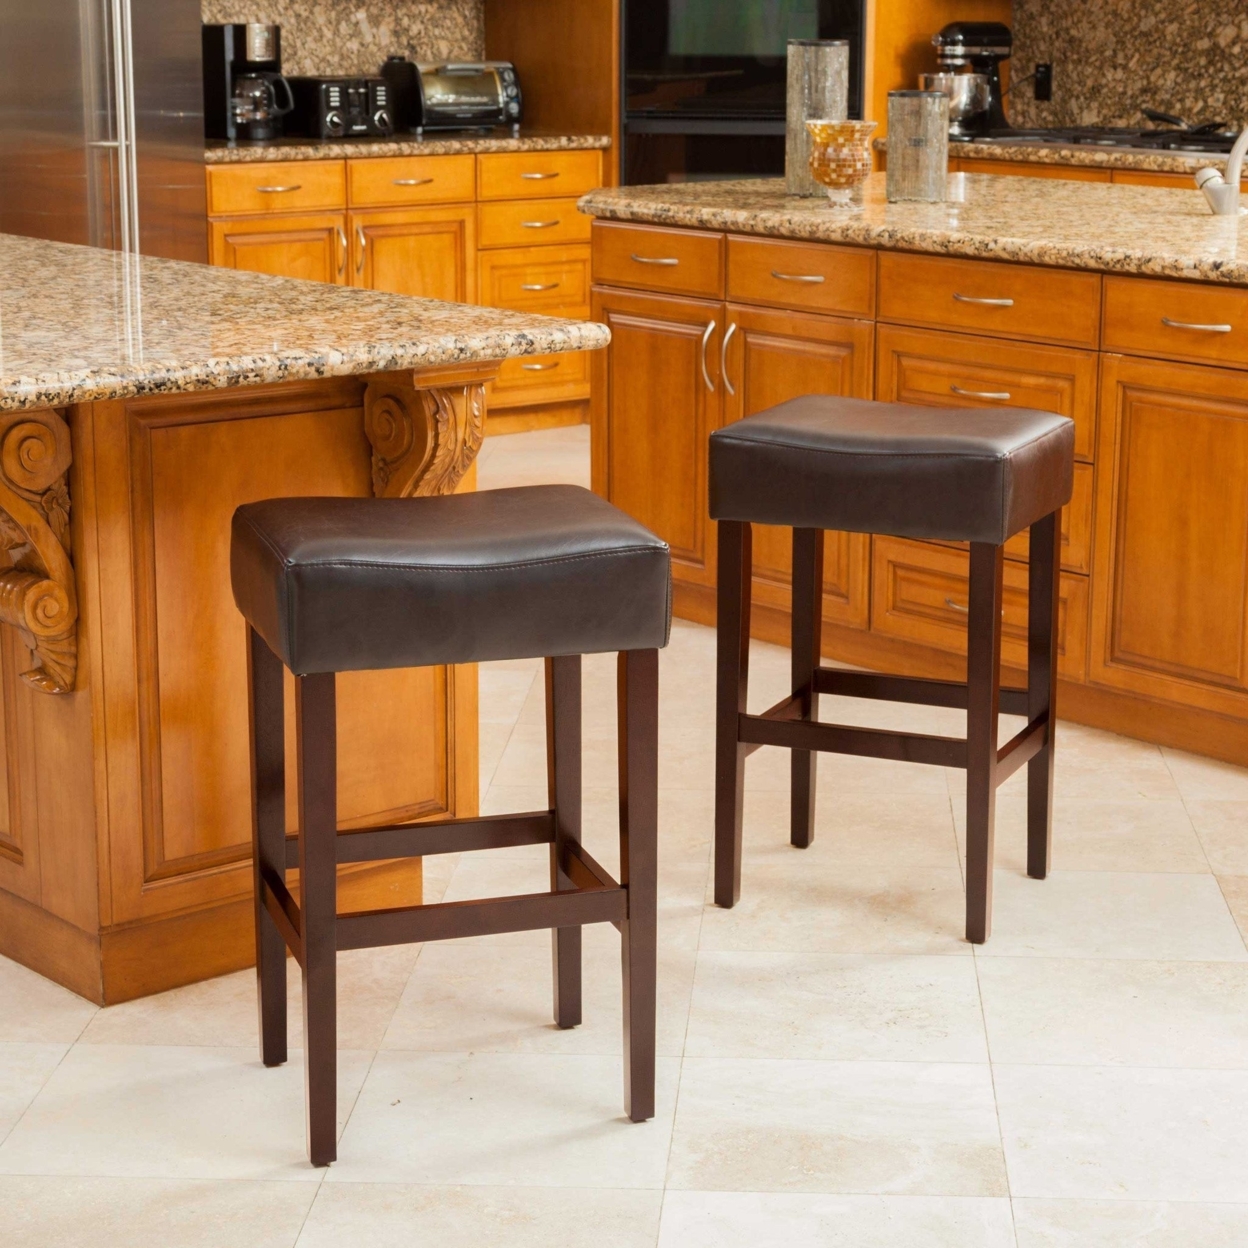 Duff Backless Leather Counter Stools (Set Of 2) - Brown, Leather, 26.46